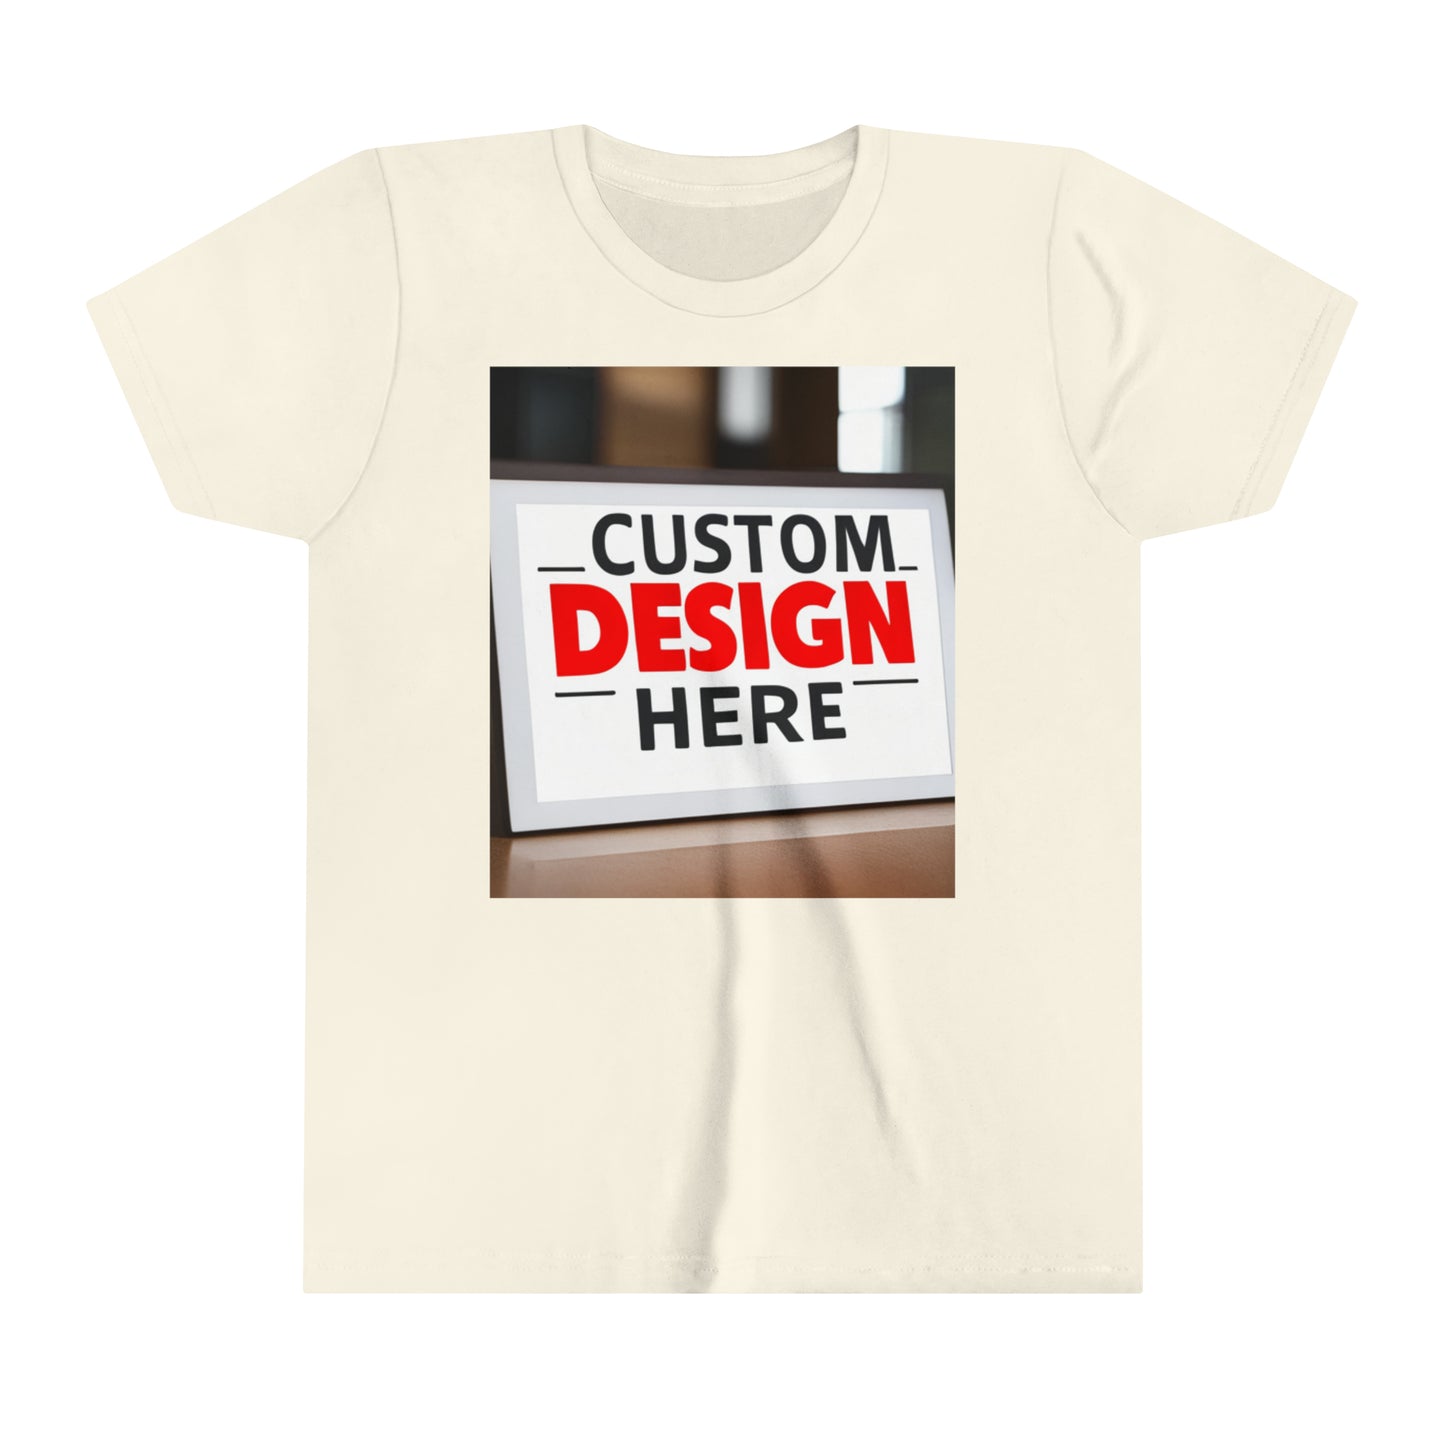 NAAMS Design Your Own Youth Short Sleeve 4.2oz Cotton Tee